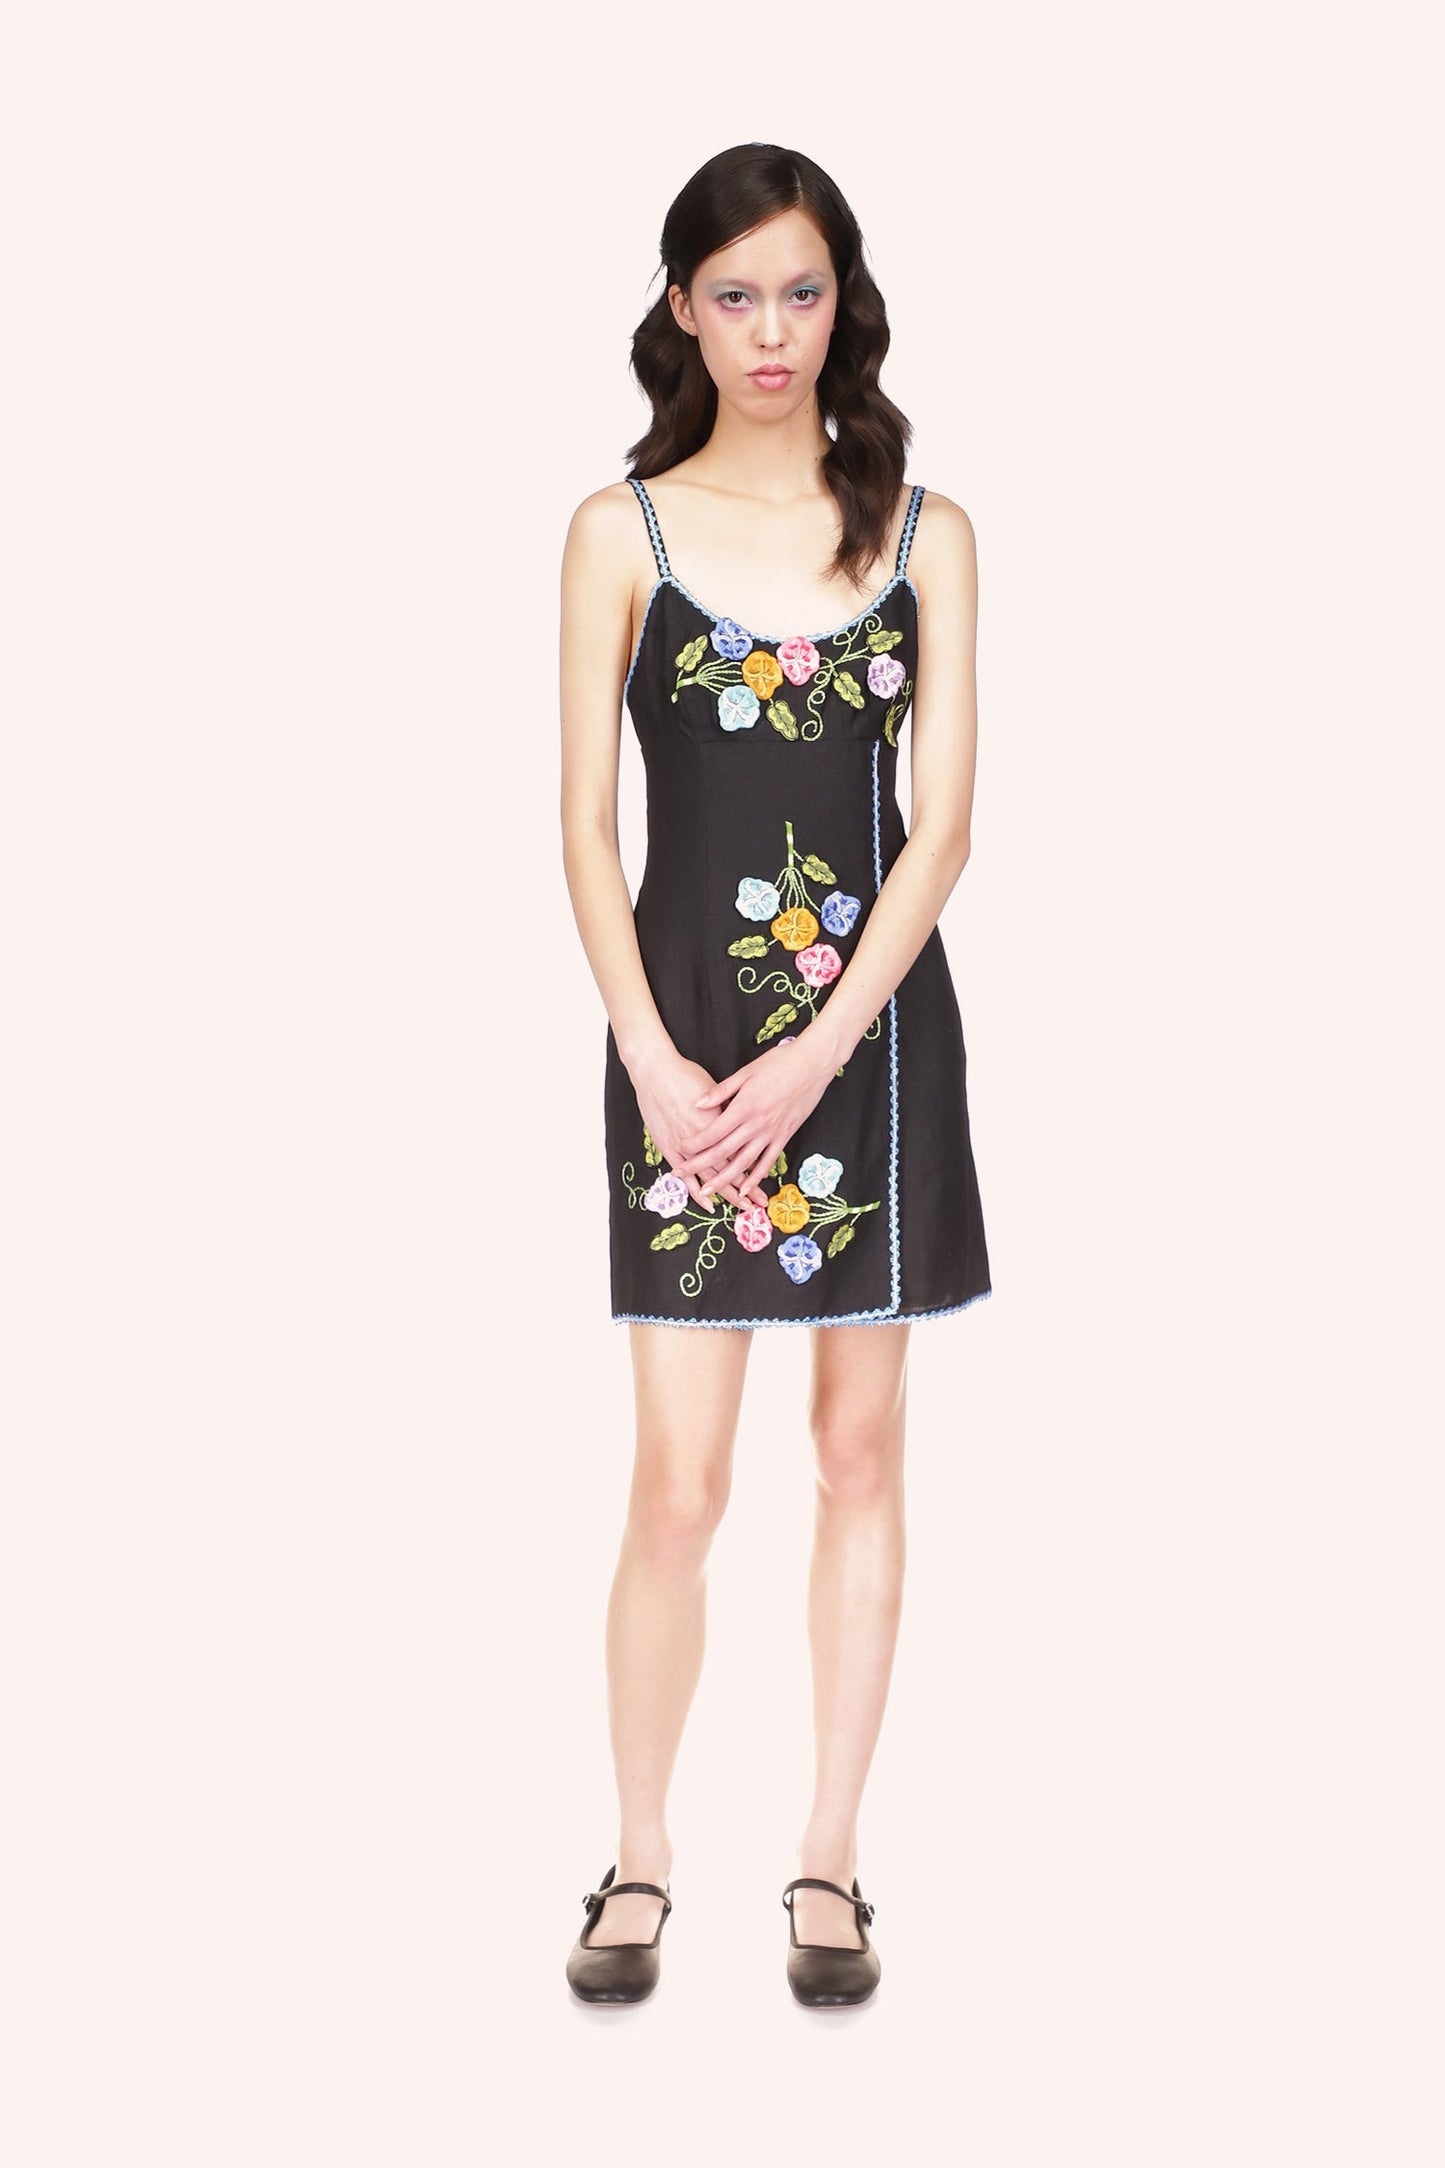 3-D Pansy Embroidered on Linen Dress, black & blue hems, above knees, sleeveless, bouquets design